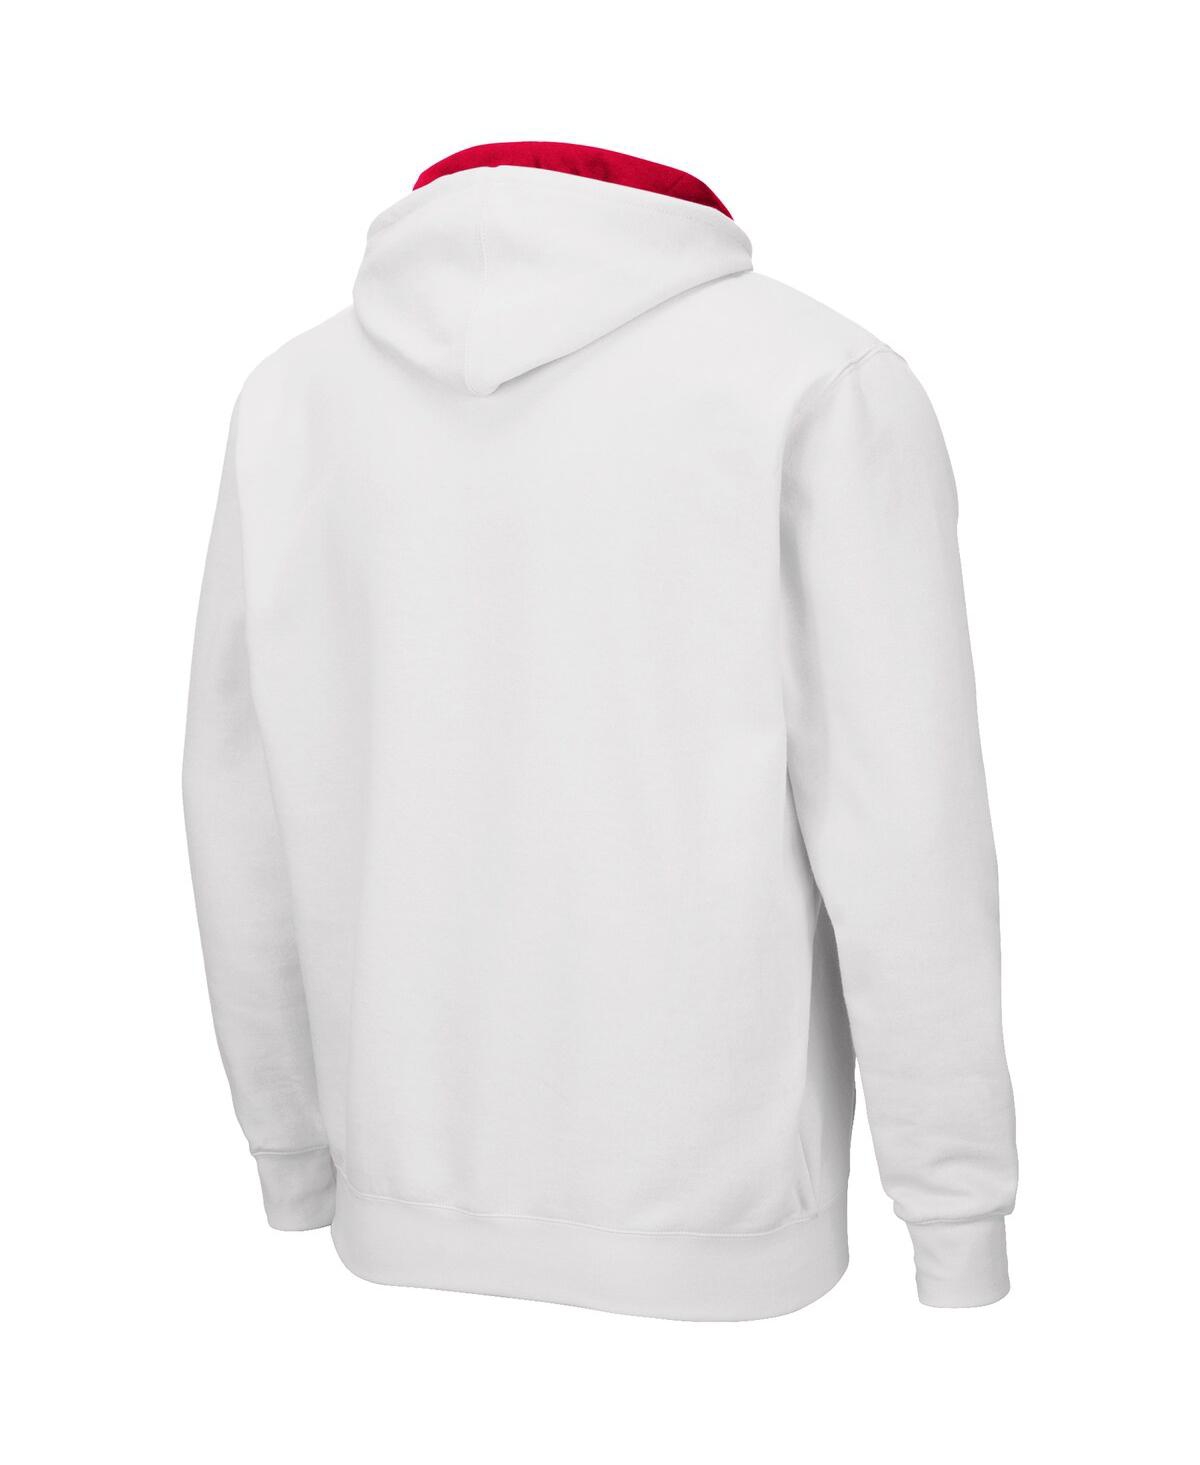 Shop Colosseum Men's  White Rutgers Scarlet Knights Arch And Logo 3.0 Full-zip Hoodie